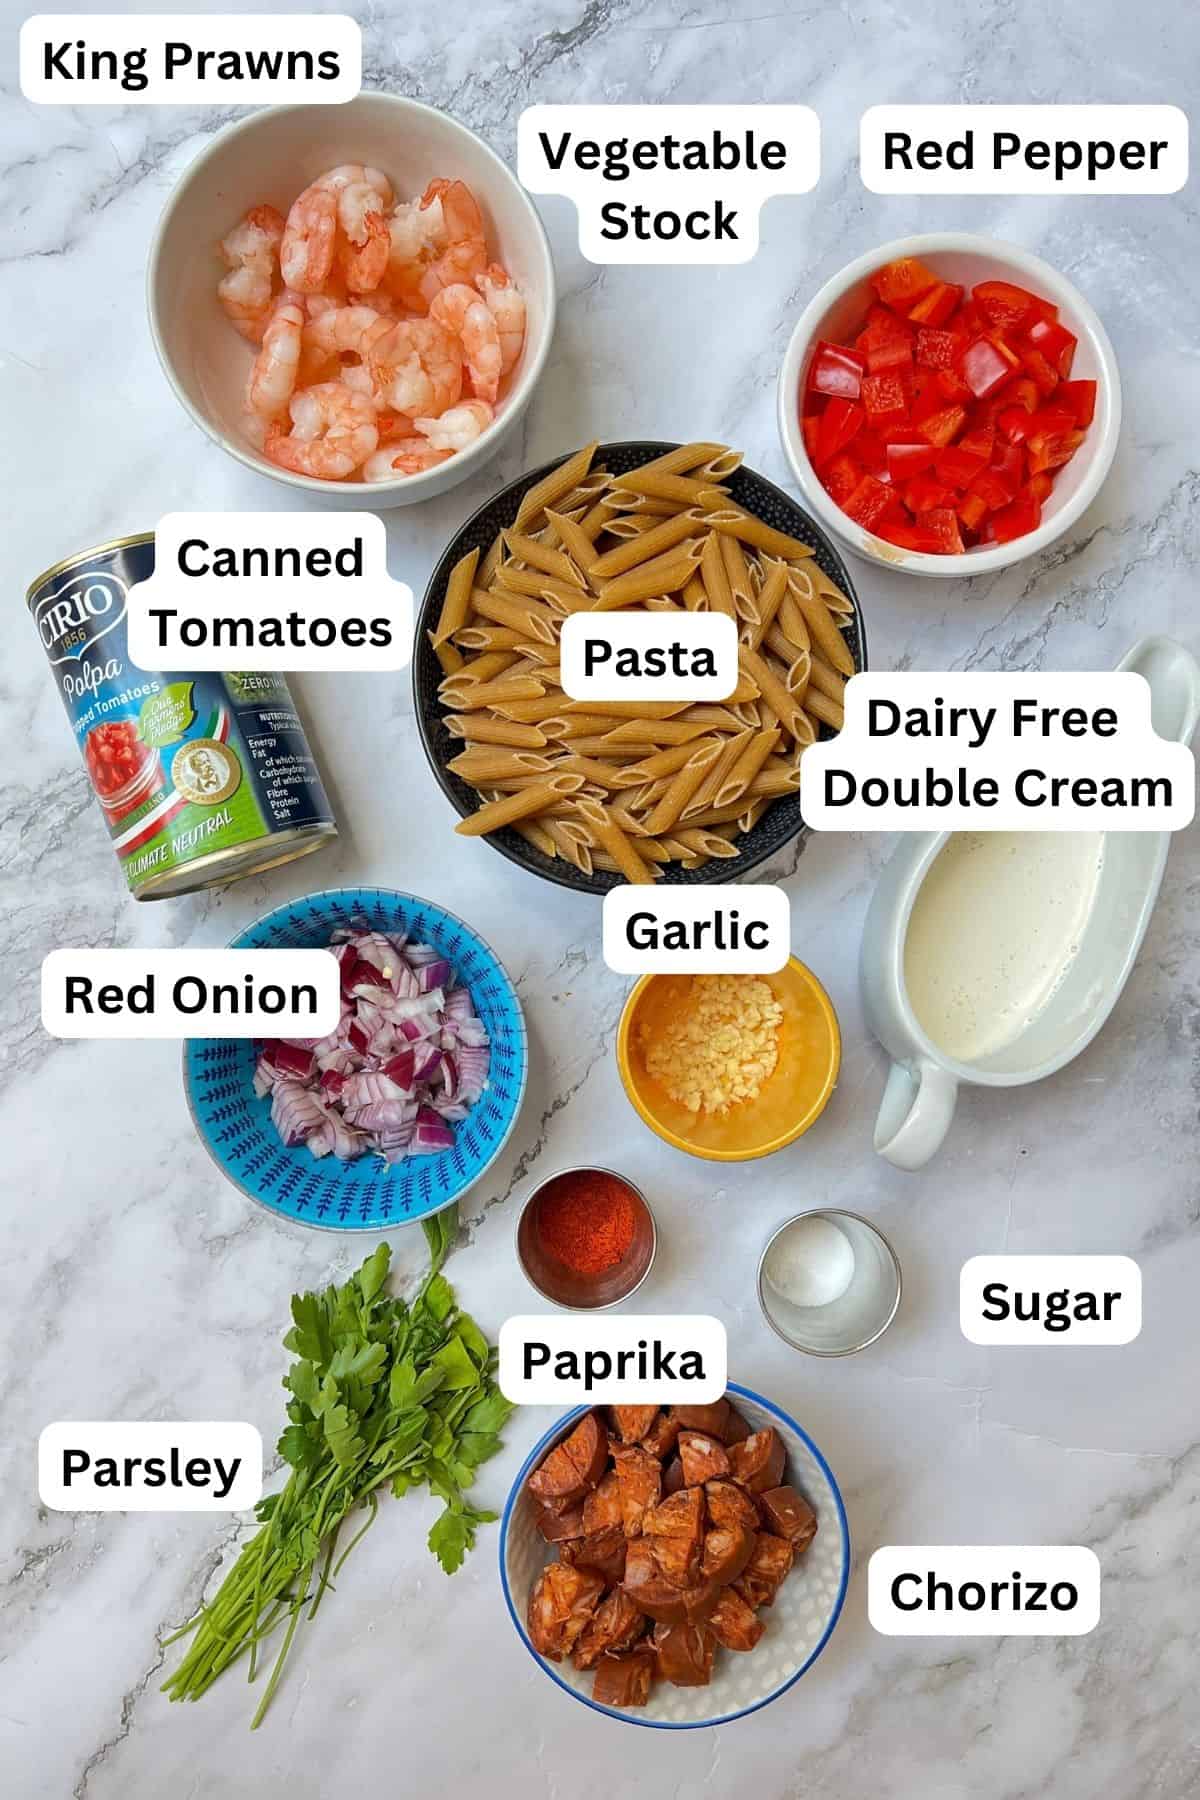 Ingredients laid out for chorizo and prawn pasta.